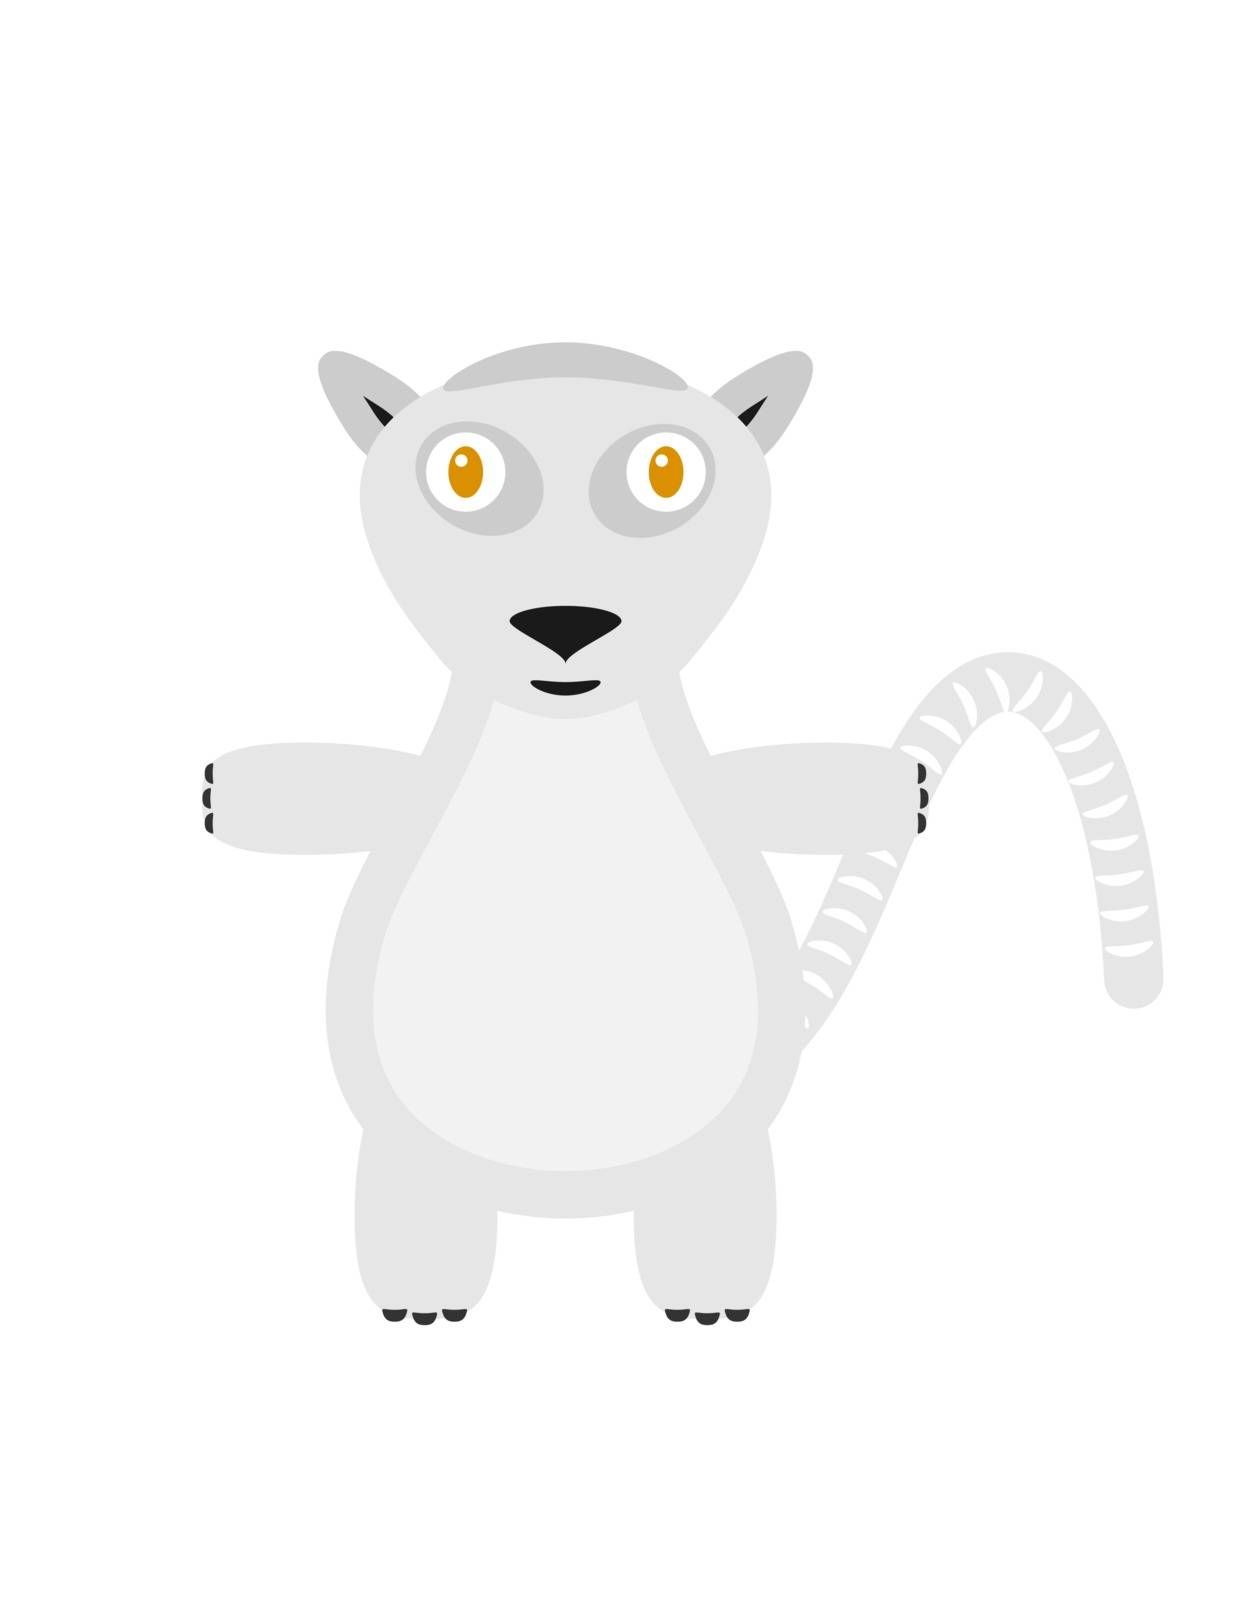 Lemur illustration as a funny character. Cute african animal with long tail. Small cartoon creature, isolated object in flat design on white background.